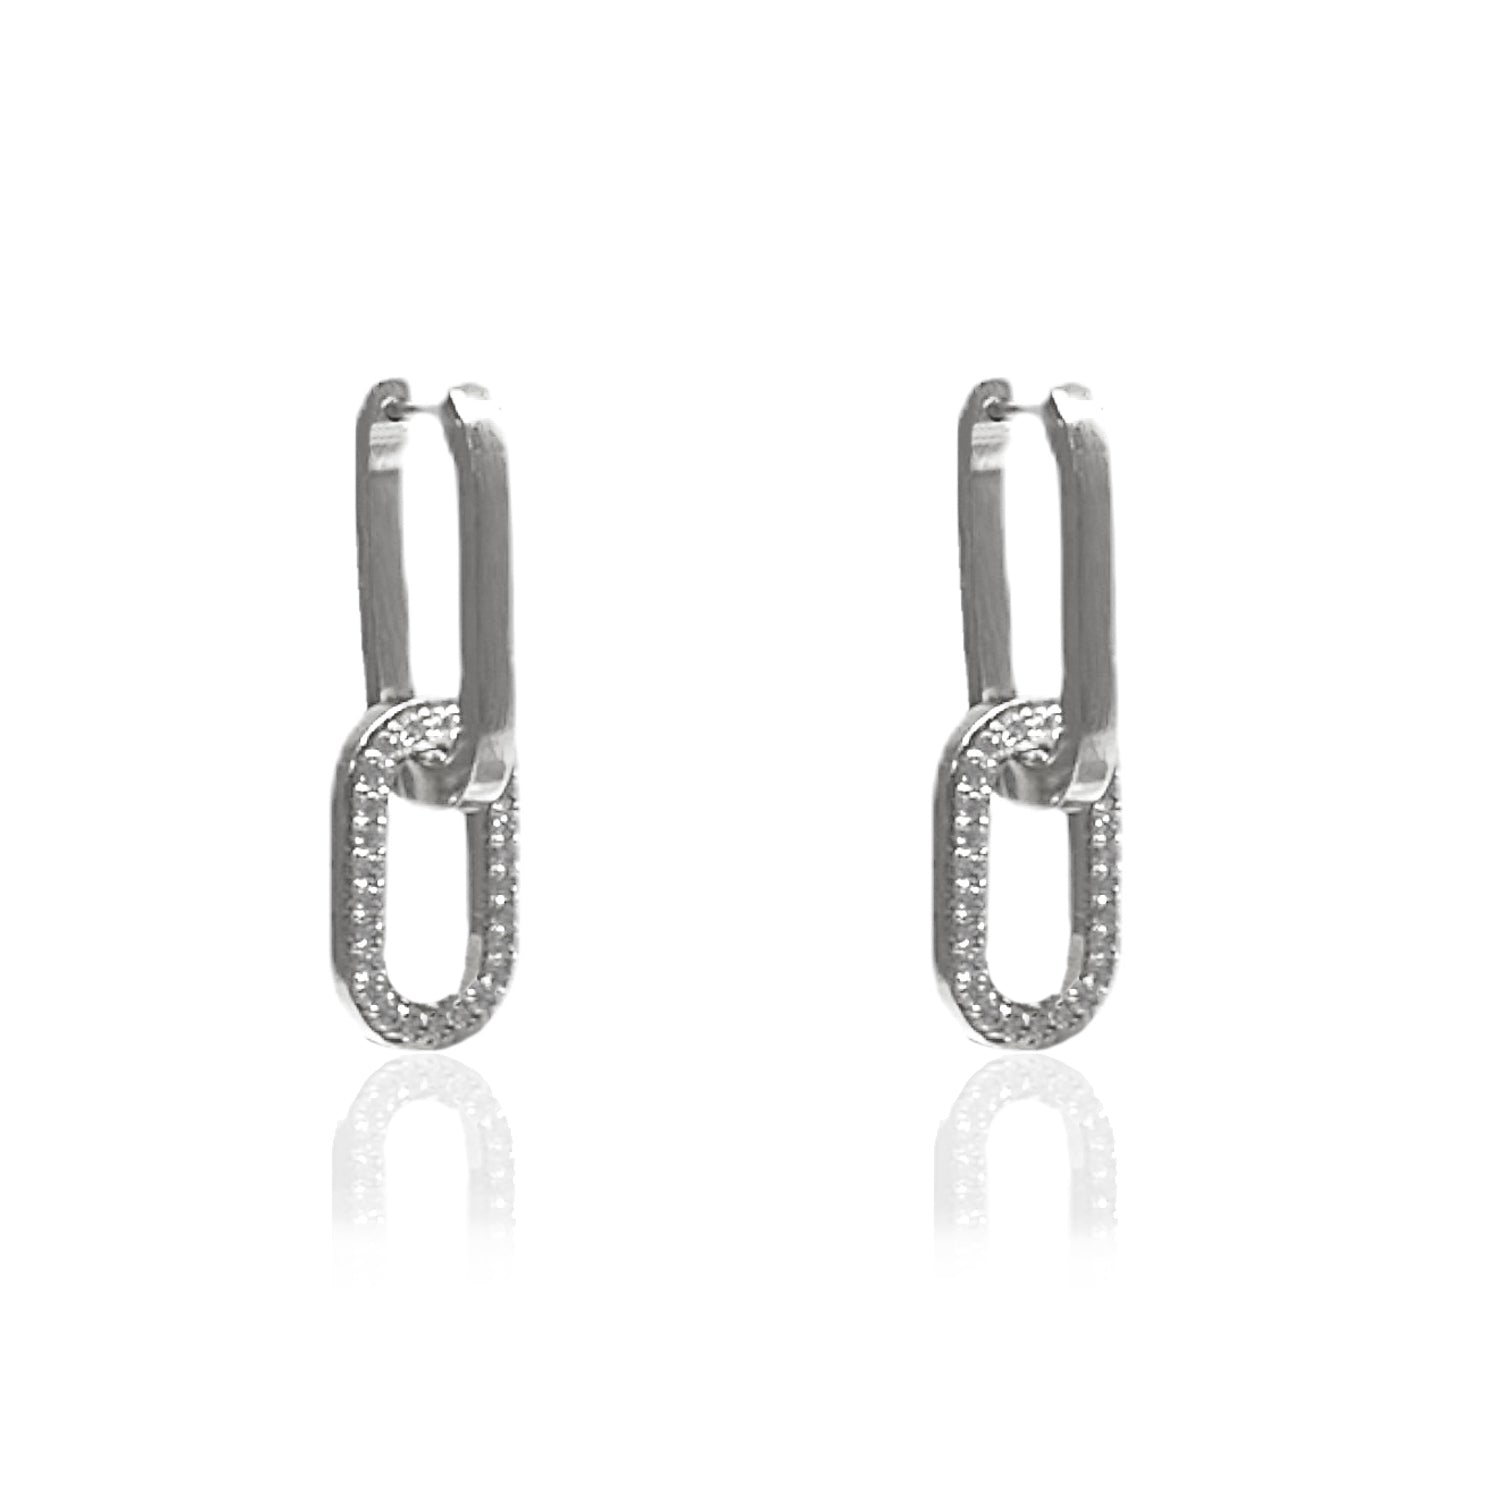 SILVER DOUBLE PAVE RICO EARRING